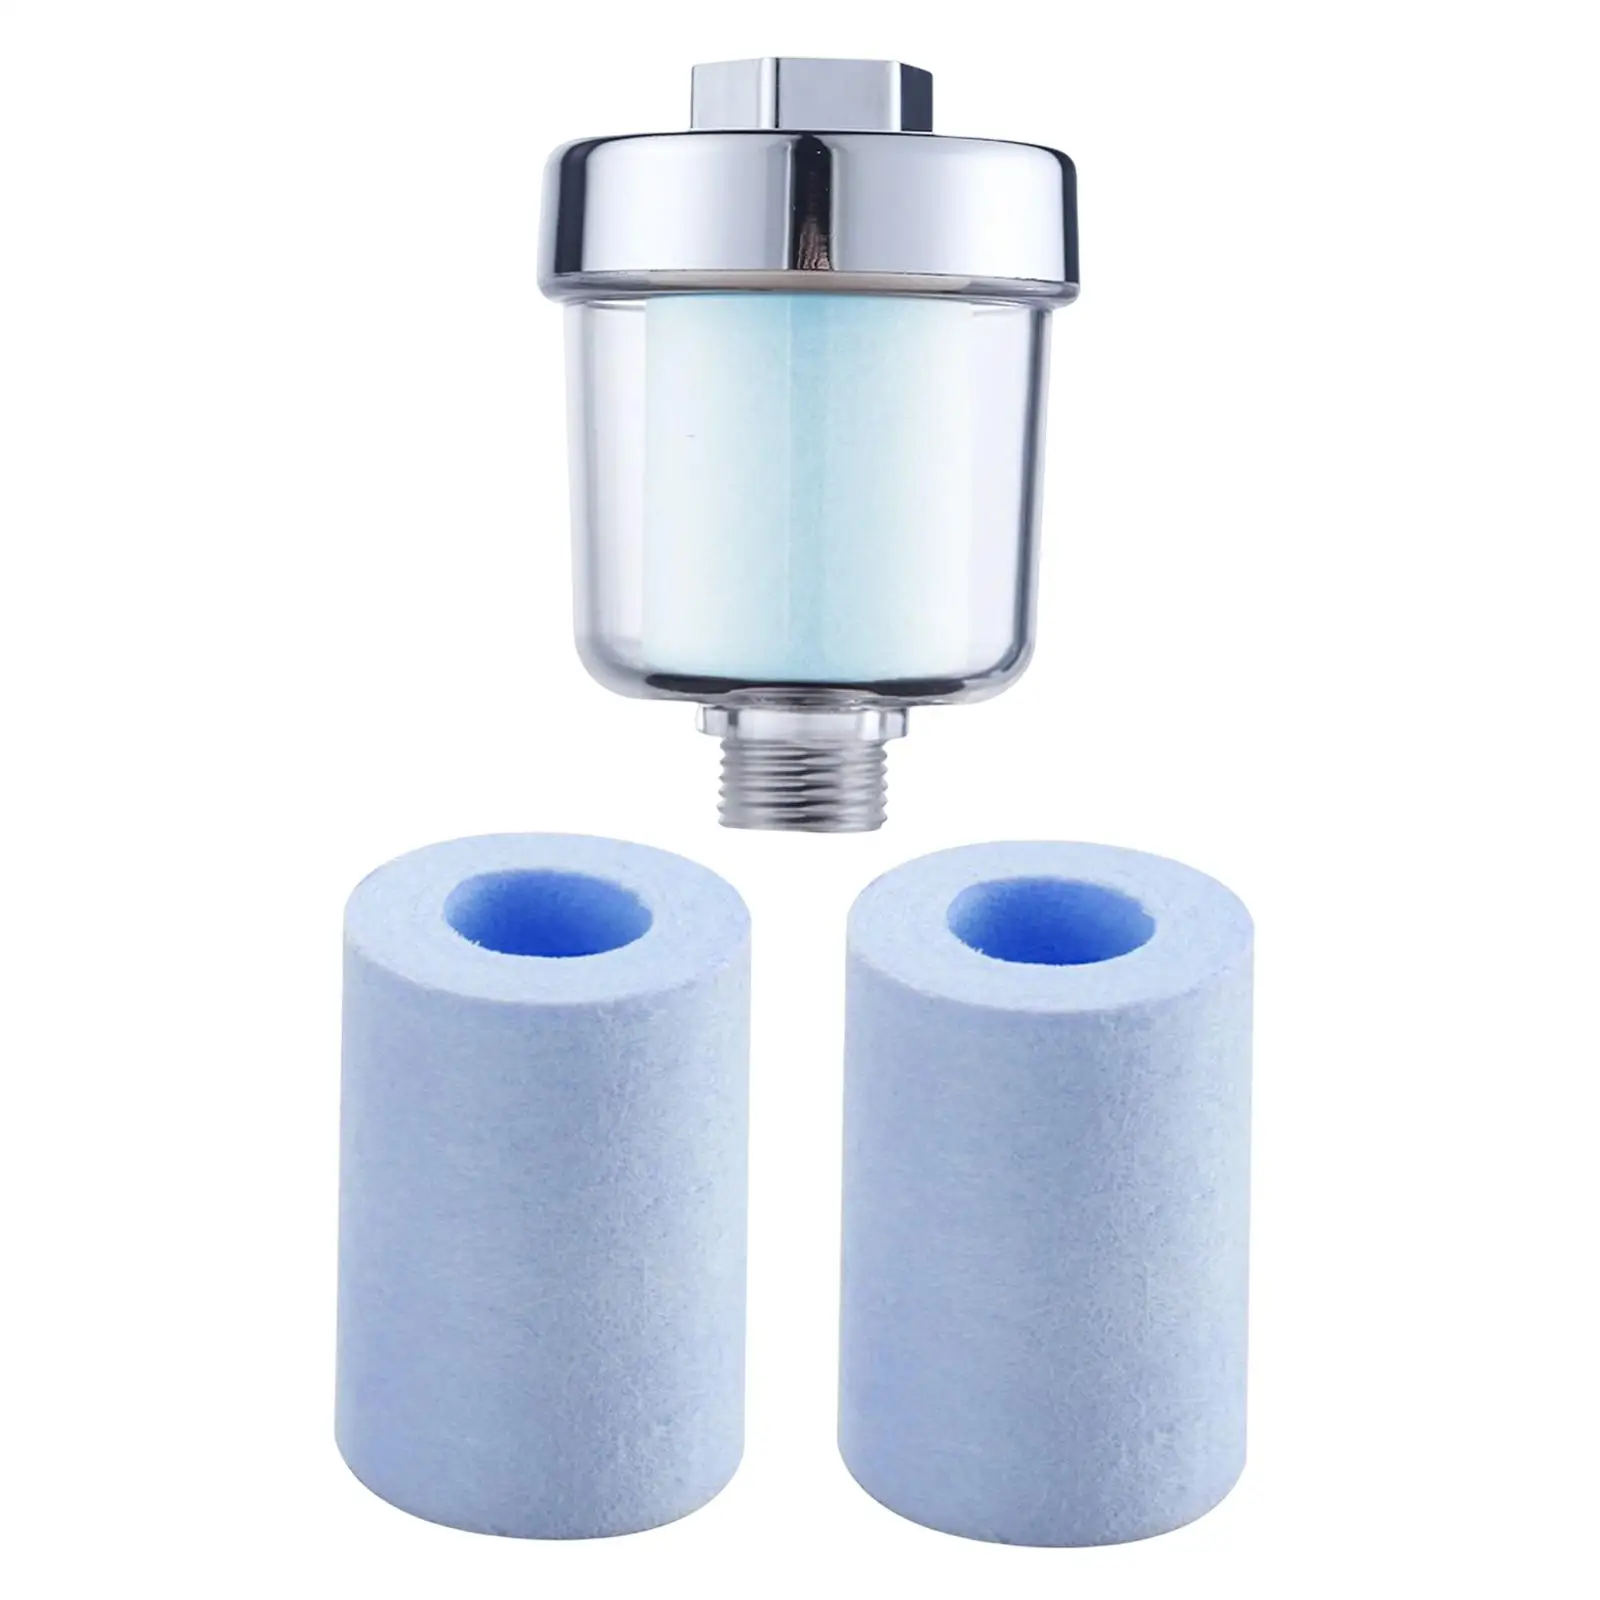 Shower Hydrant Filter Replacement Practical Transparent Durable for Bathroom